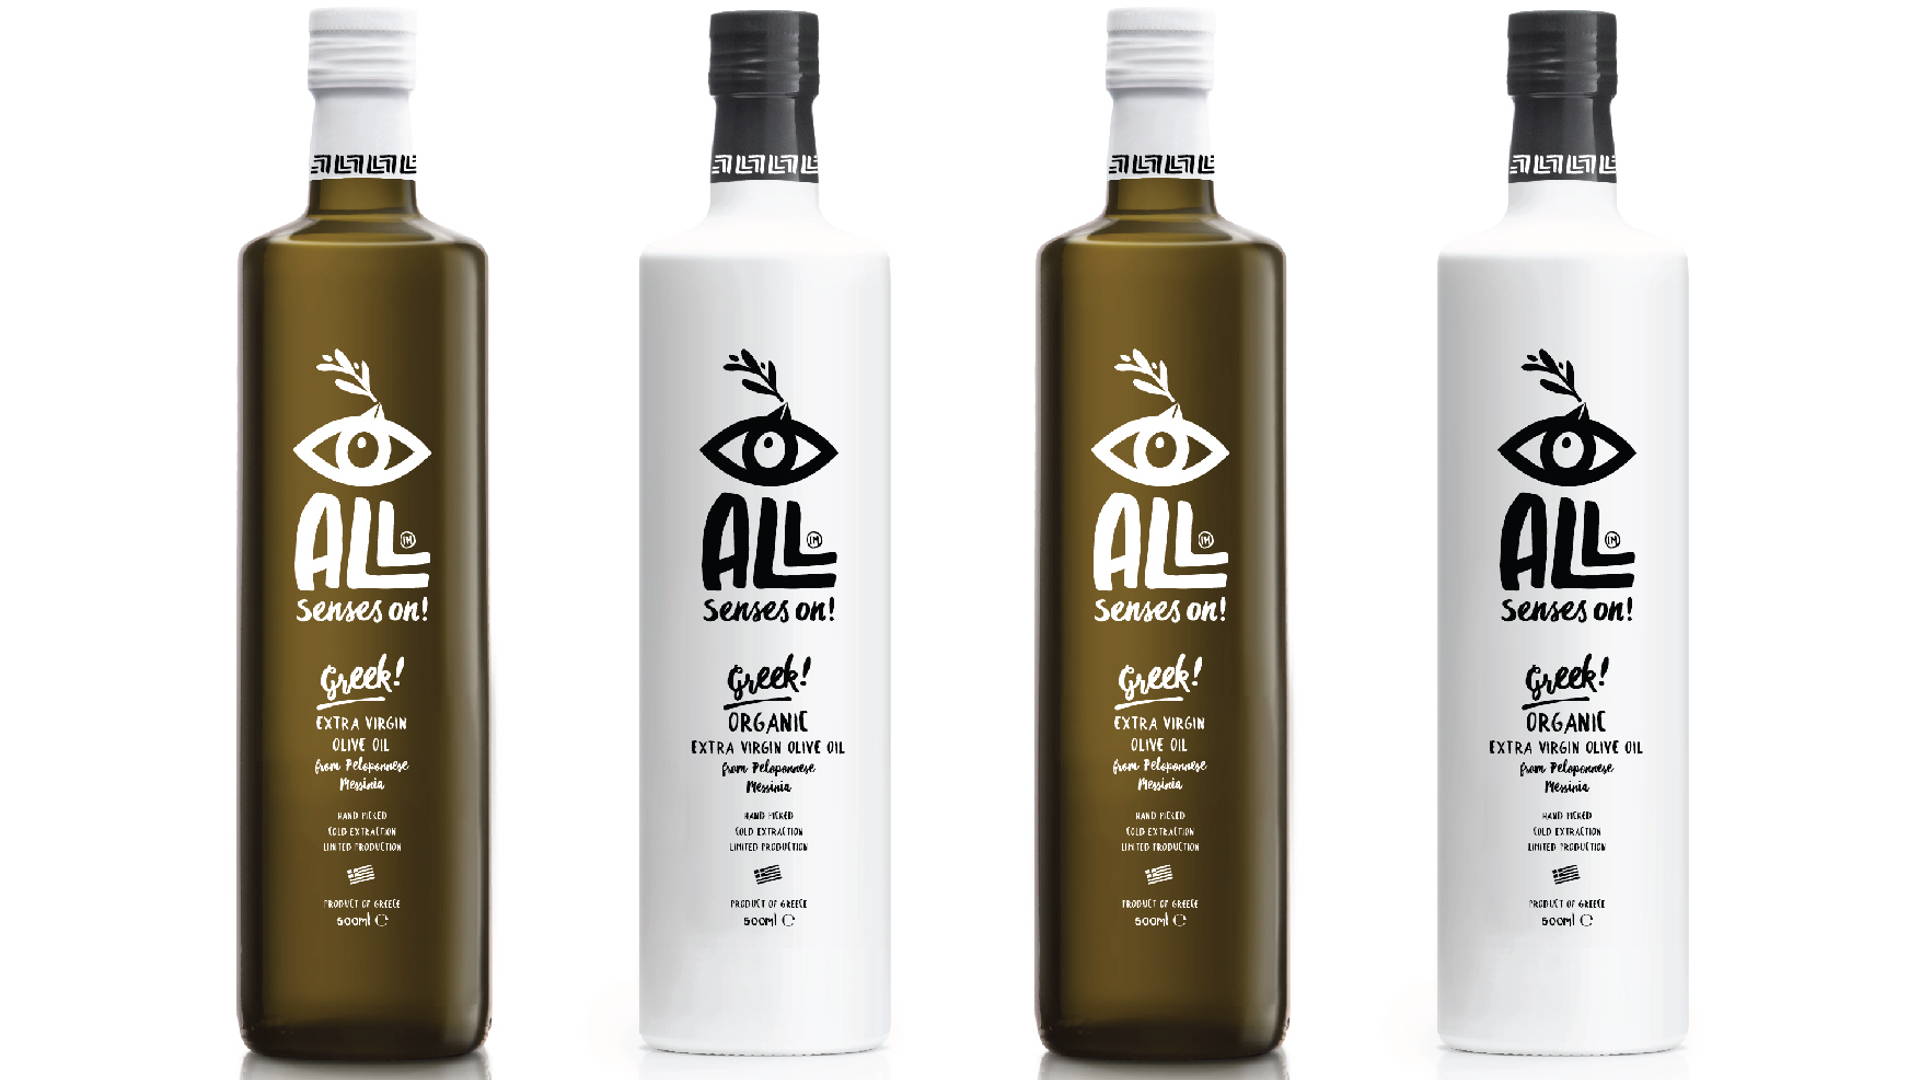 Featured image for This Greek Extra Virgin Olive Oil Design Taps into Your Primal Senses